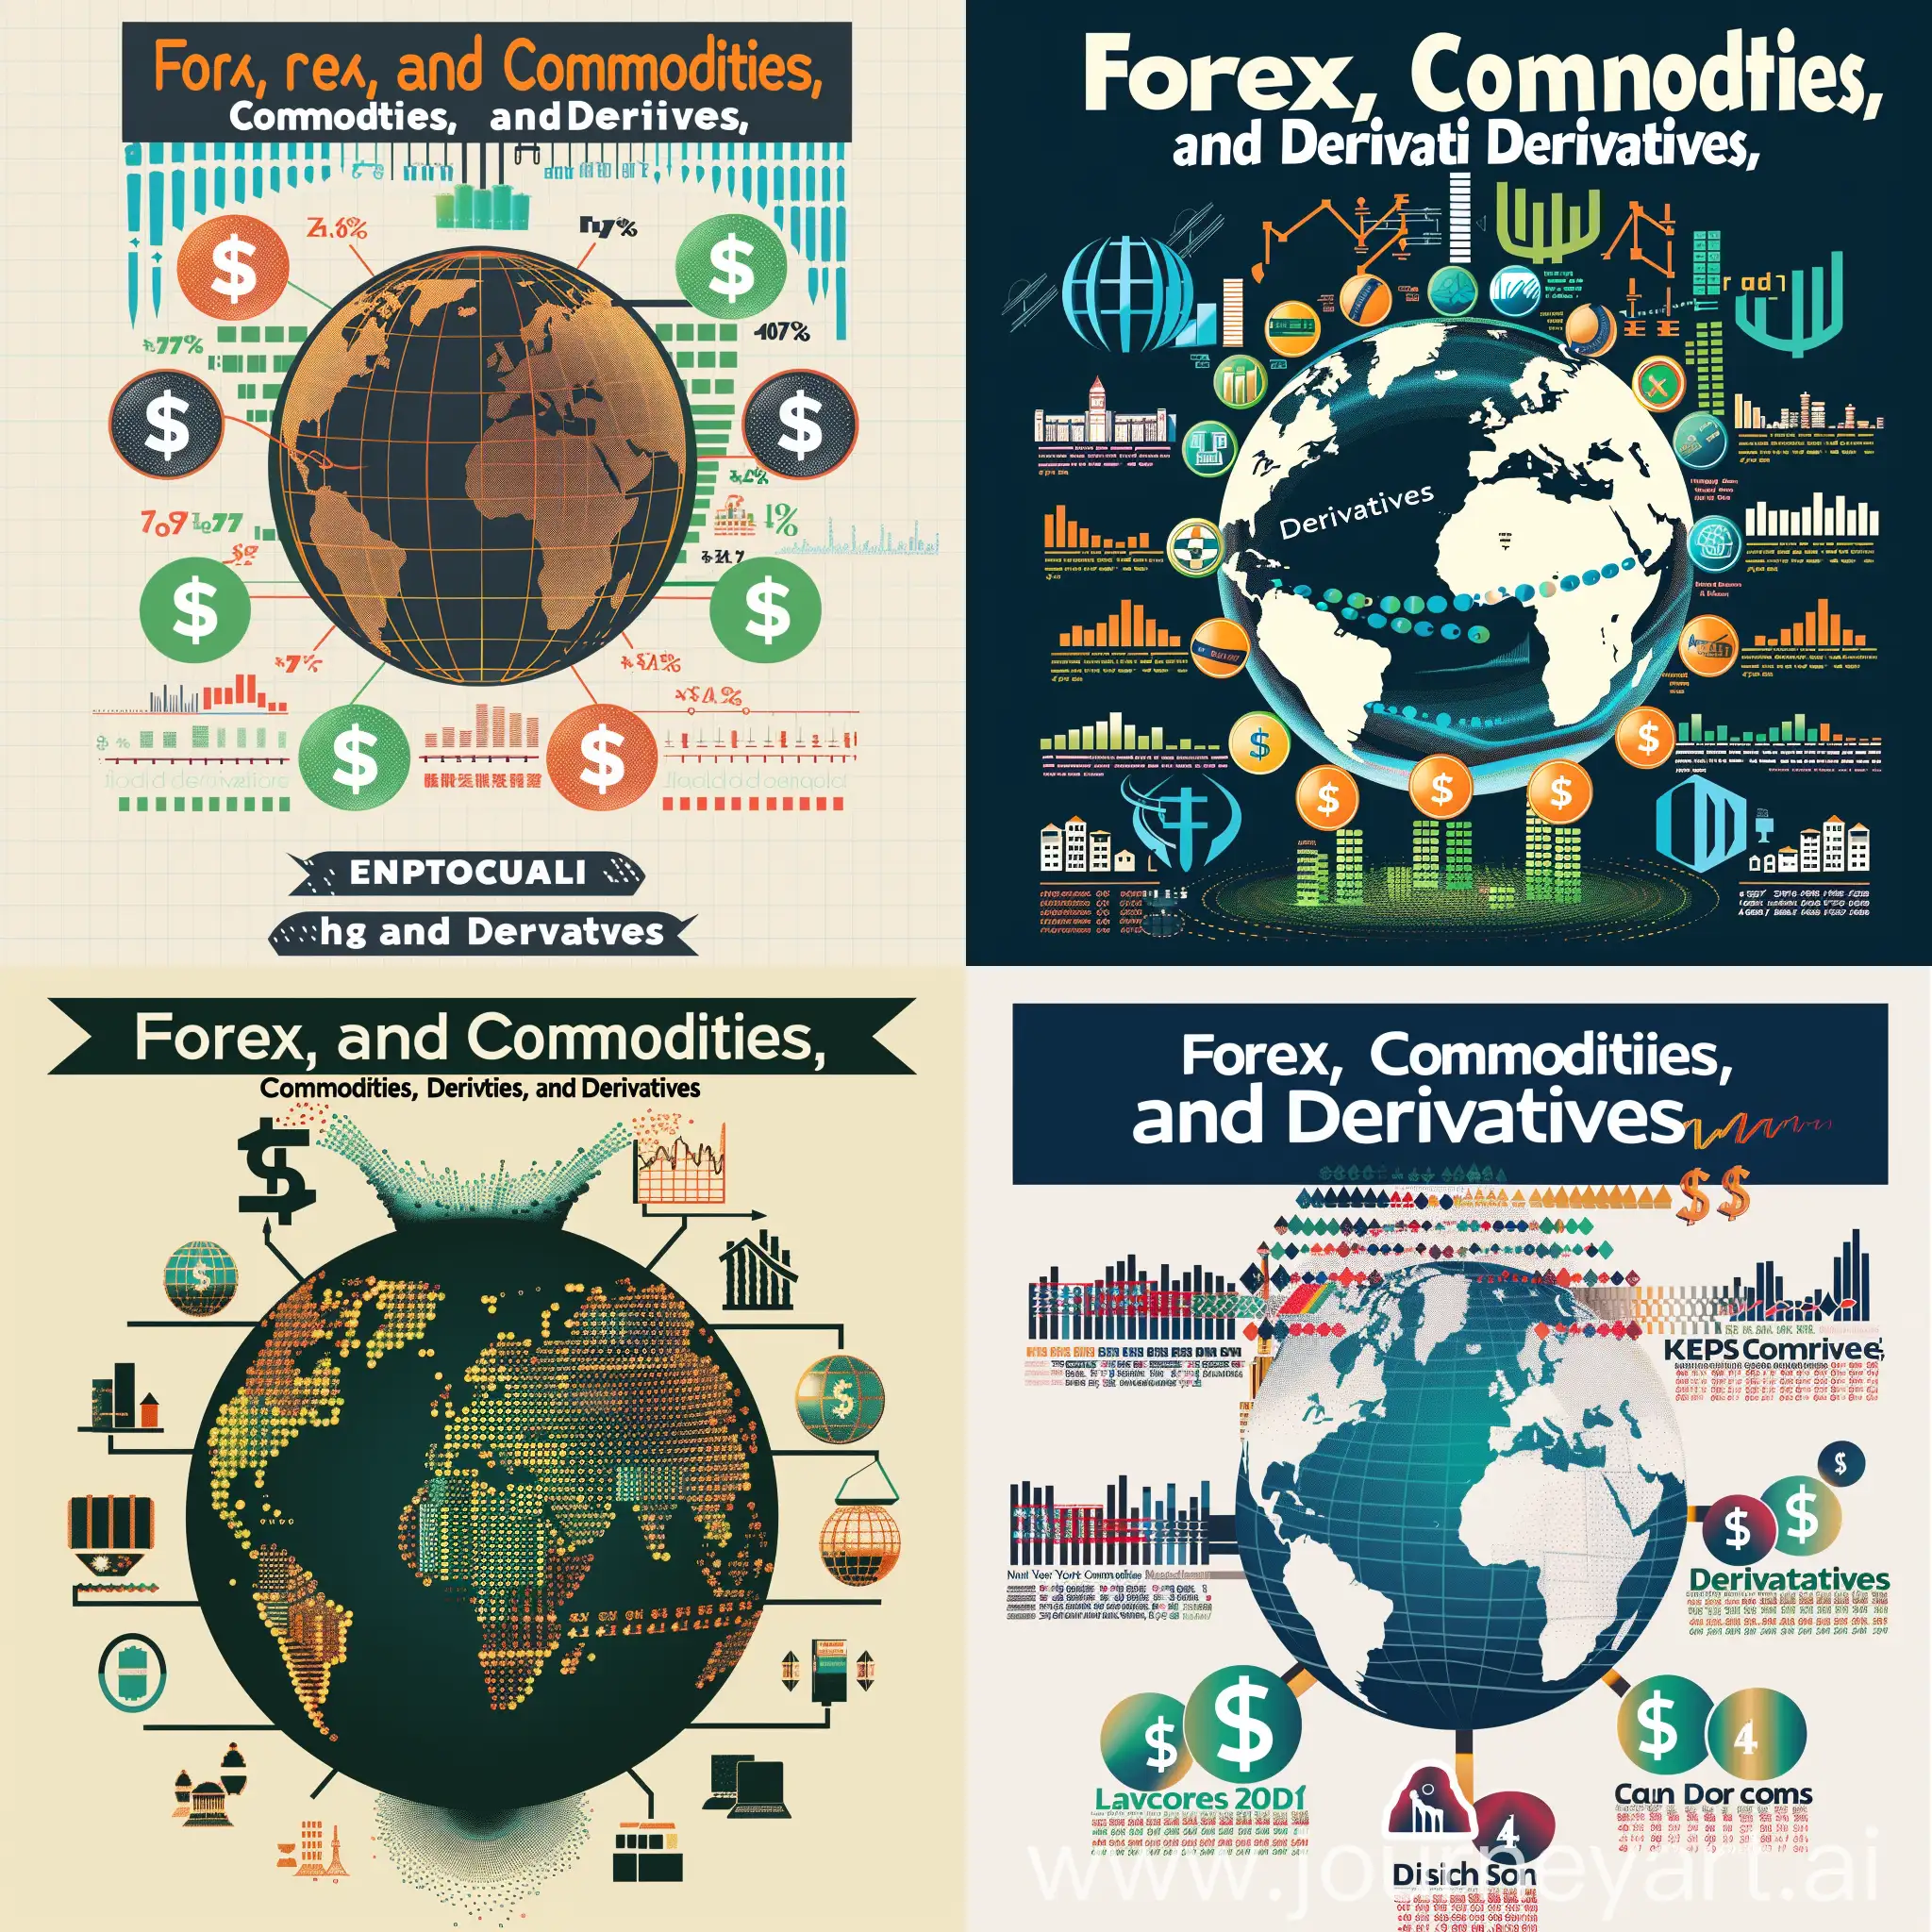 Create a poster on forex, commodities, and derivatives that is similar to the image you provided, but with a more dynamic feel.  Instead of a static sphere, use a globe with major financial centers (New York, London, Tokyo, etc.) prominently displayed.  Incorporate multiple currency symbols (€, $, £, ¥) appearing to rise and flow upwards around the globe, suggesting a bull market. Use a classic color scheme of blues, greens, and golds. Include the title “Forex, Commodities, and Derivatives” in a bold, easy-to-read font. Consider adding a subtle texture, like a faint grid, to the background for depth.